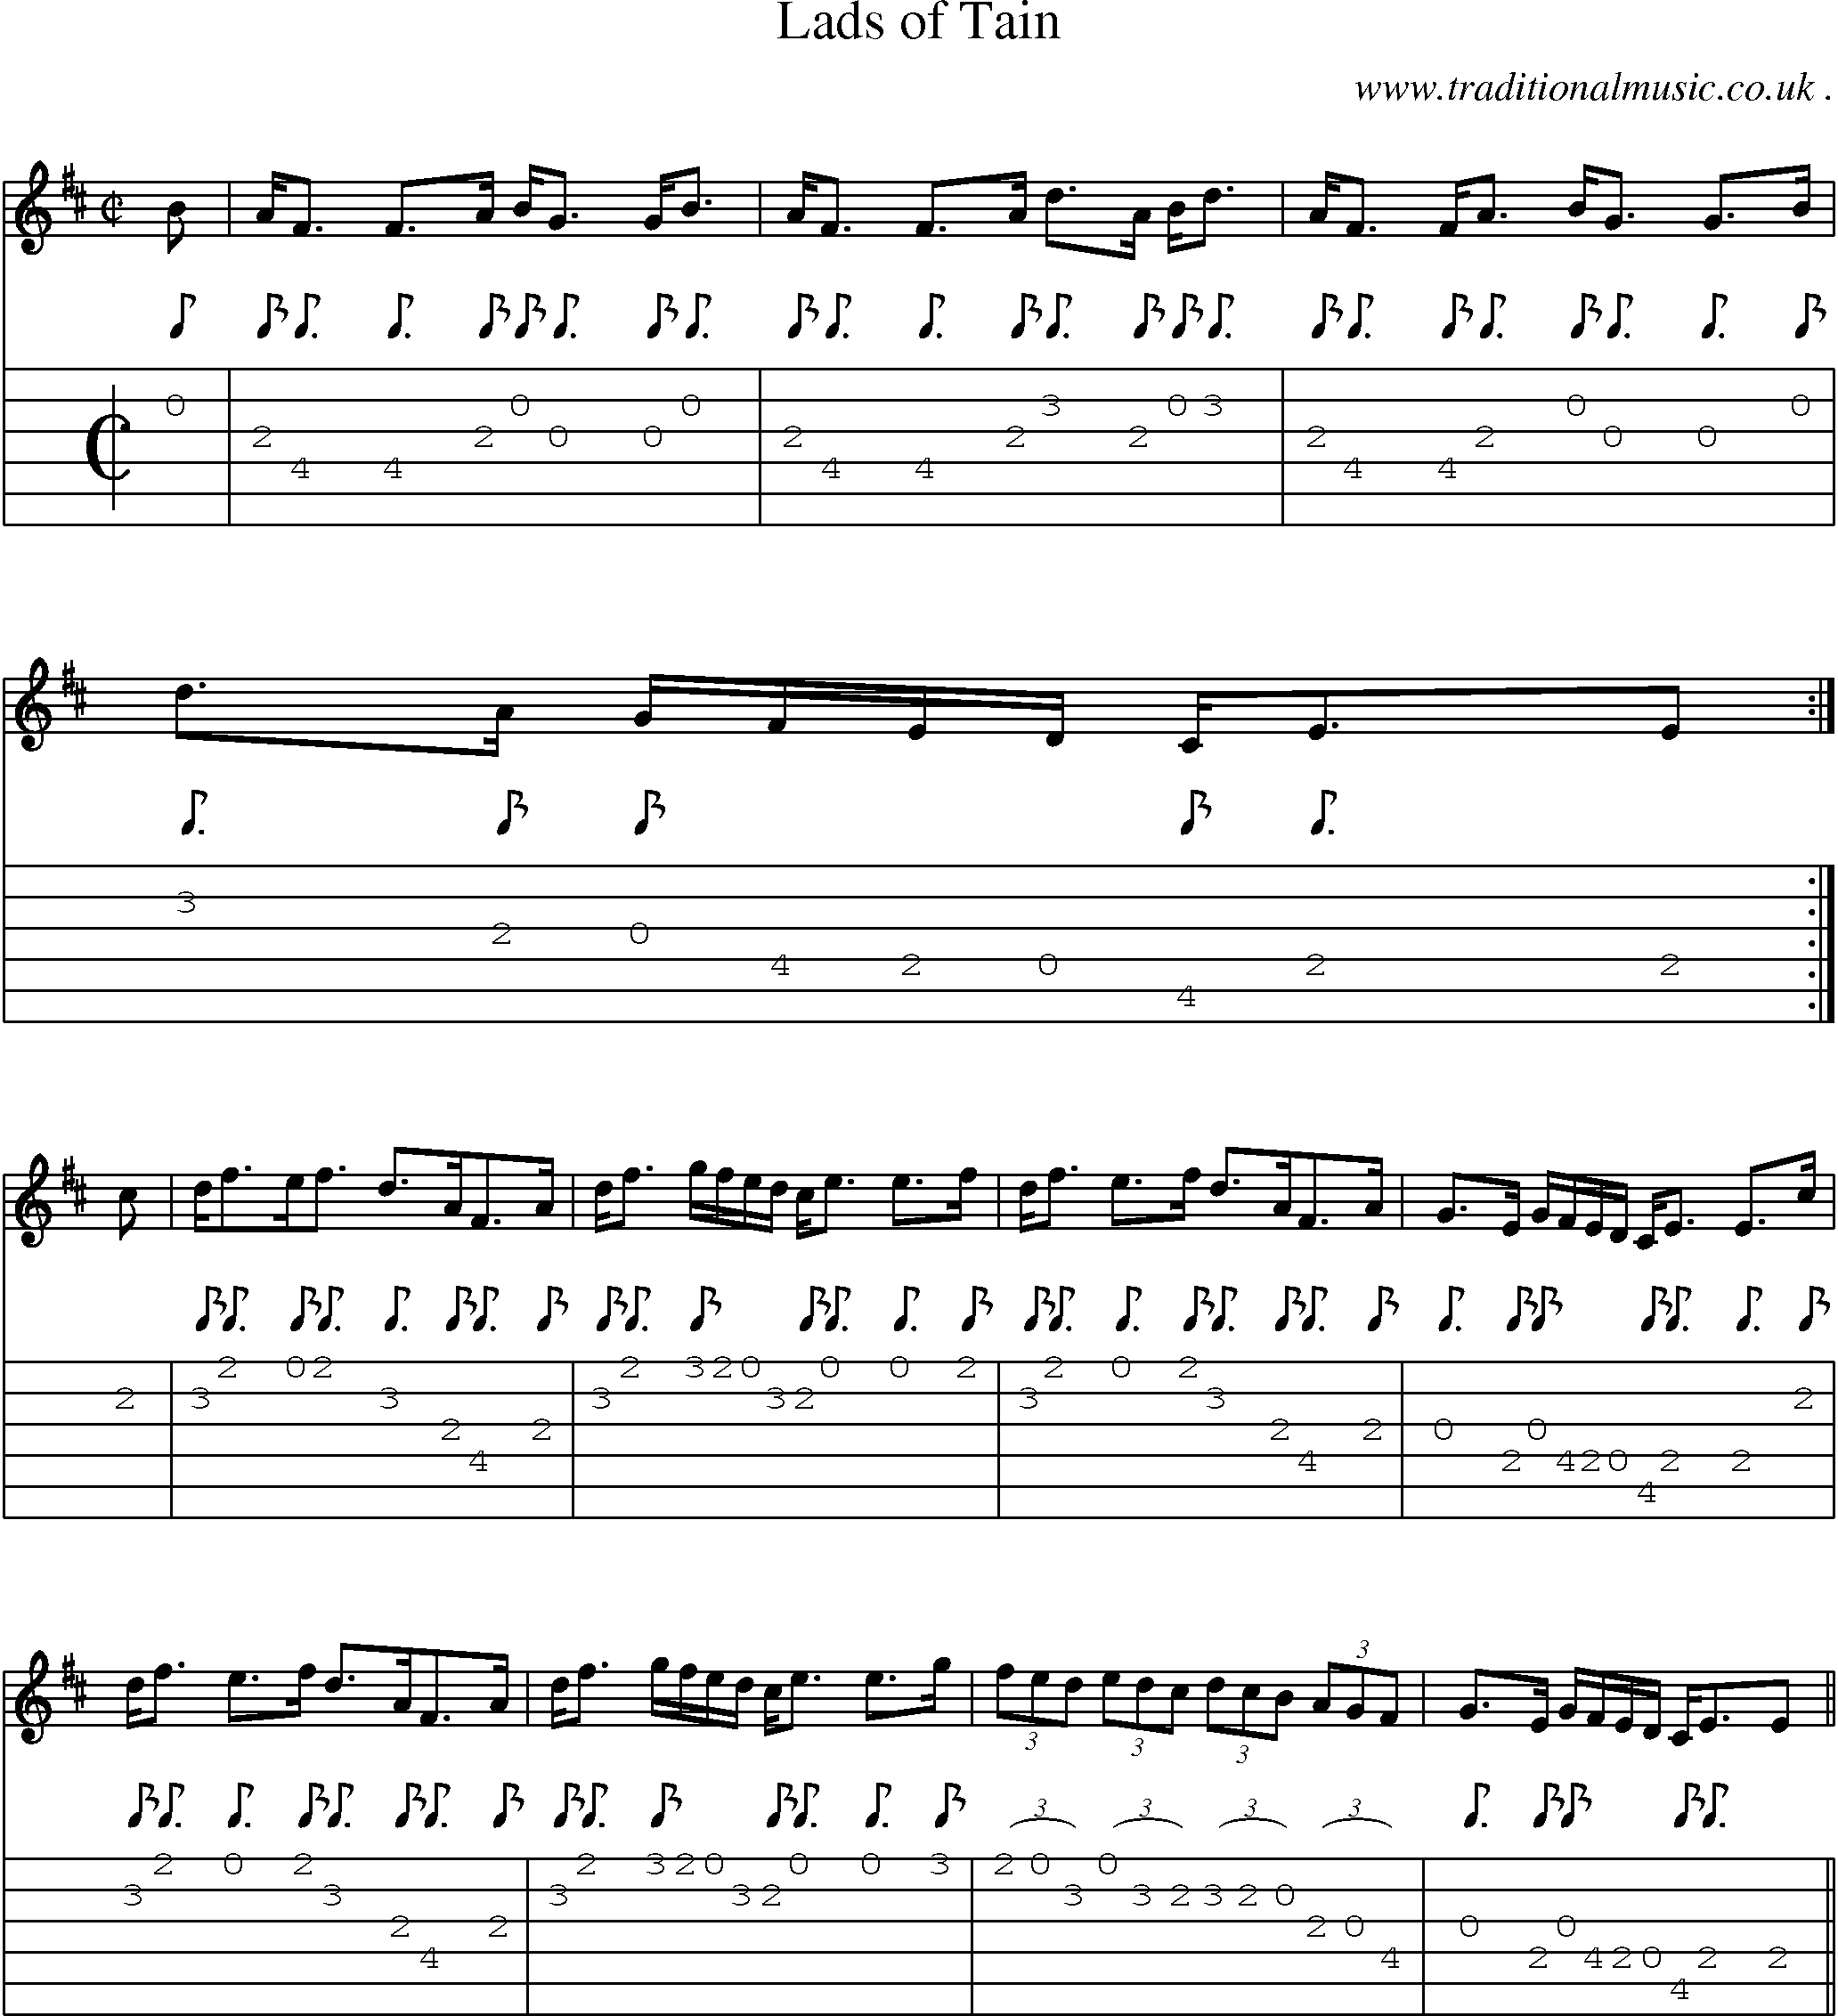 Sheet-music  score, Chords and Guitar Tabs for Lads Of Tain